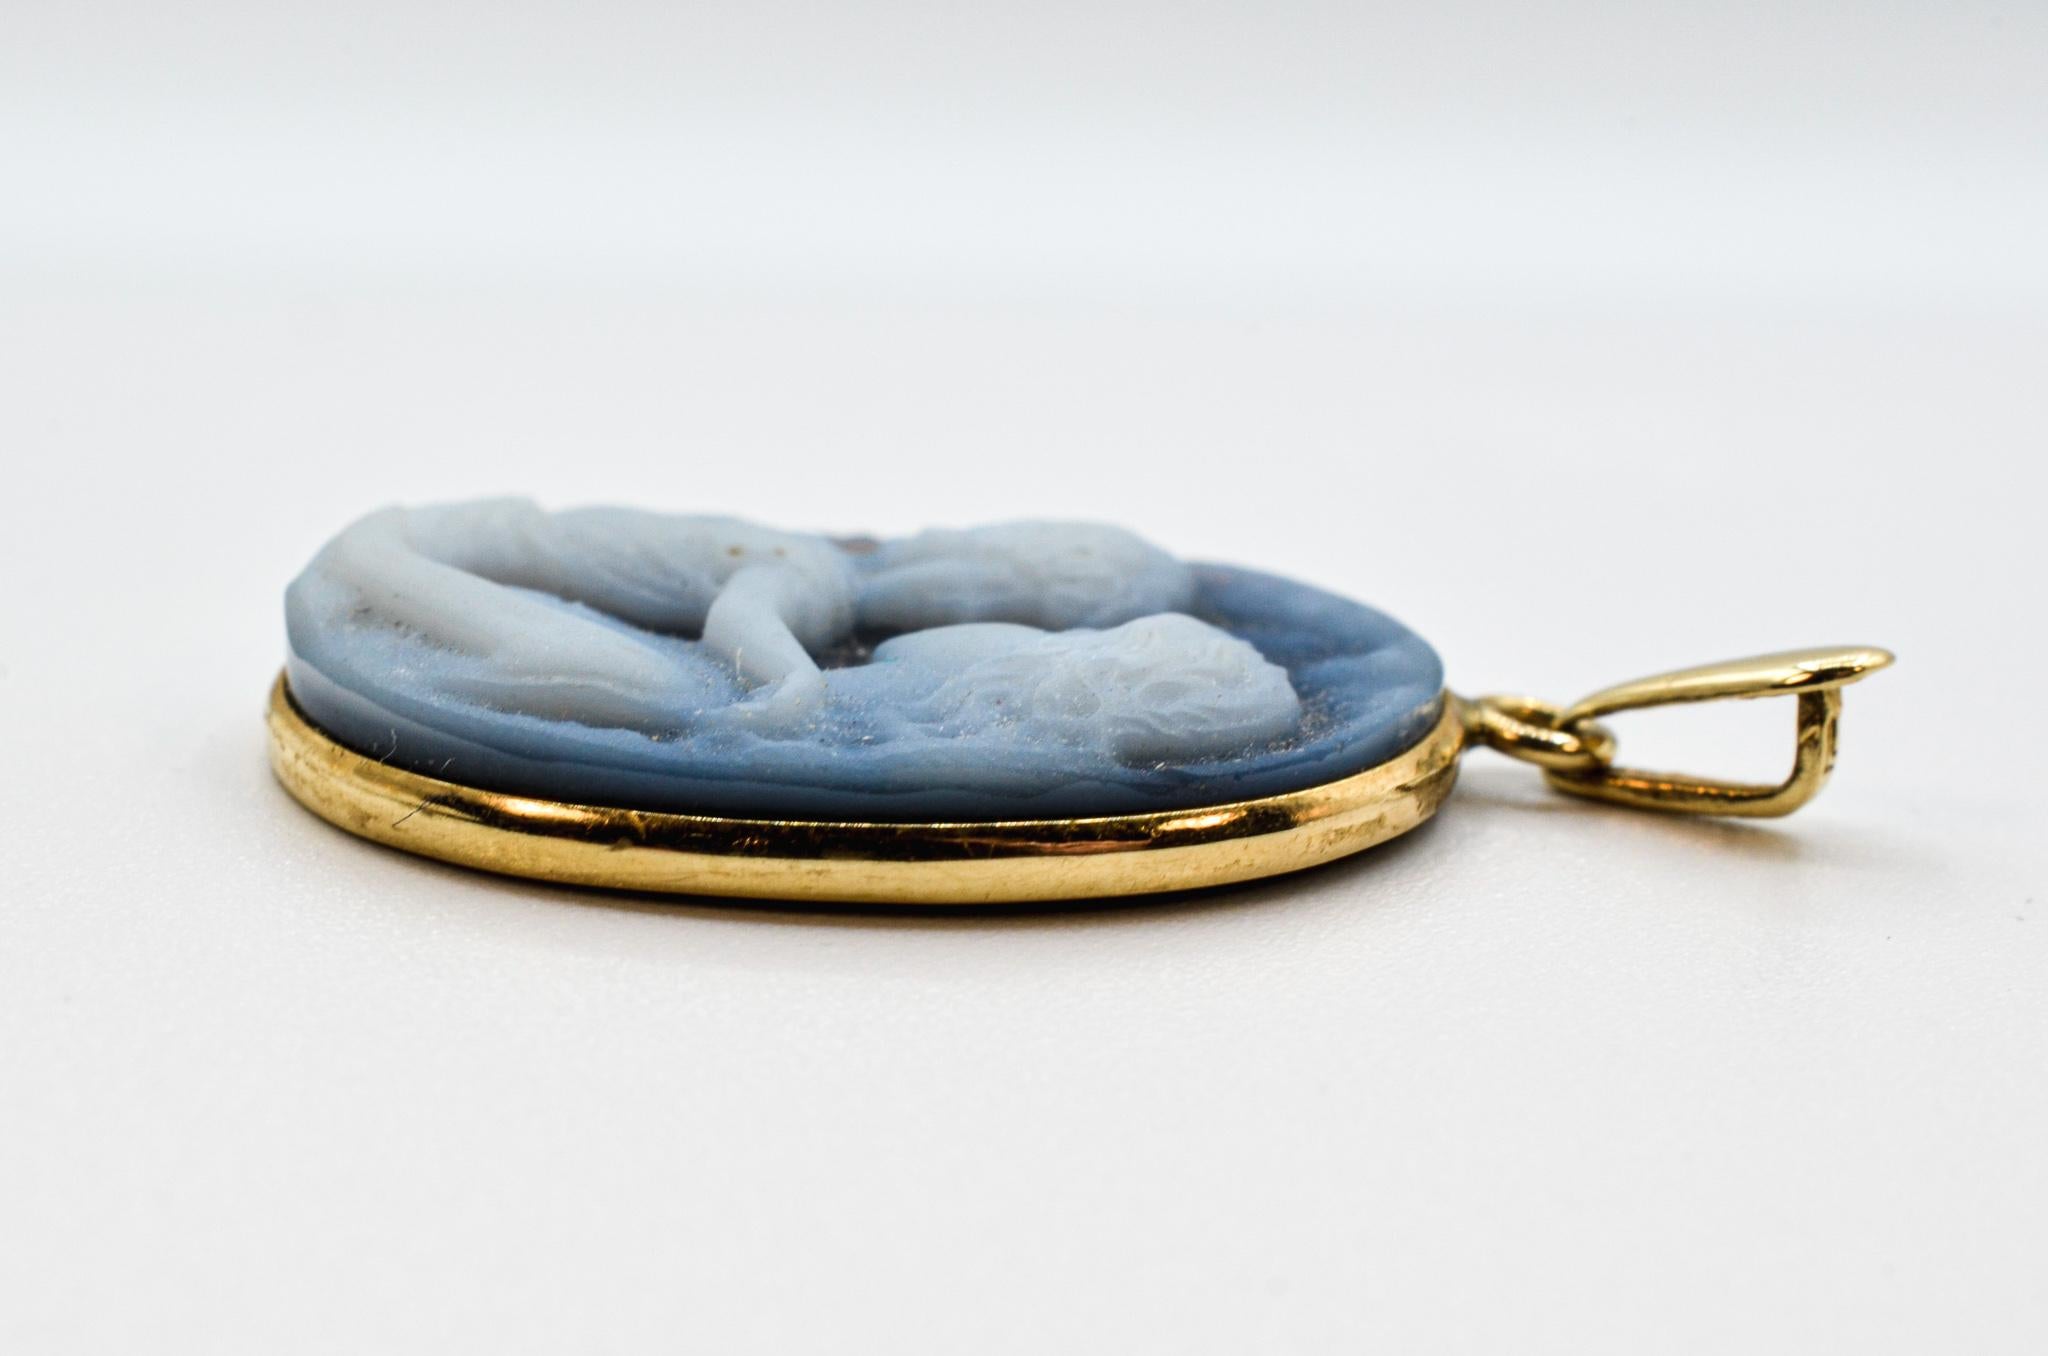 A lovely piece depicting a mother and child, a manifestation of tender love, sweetness, and devotion. This pendant features a stunning oval blue agate carved with a silhouette portrait of a mother with a child in her arms hugging her. Finished in